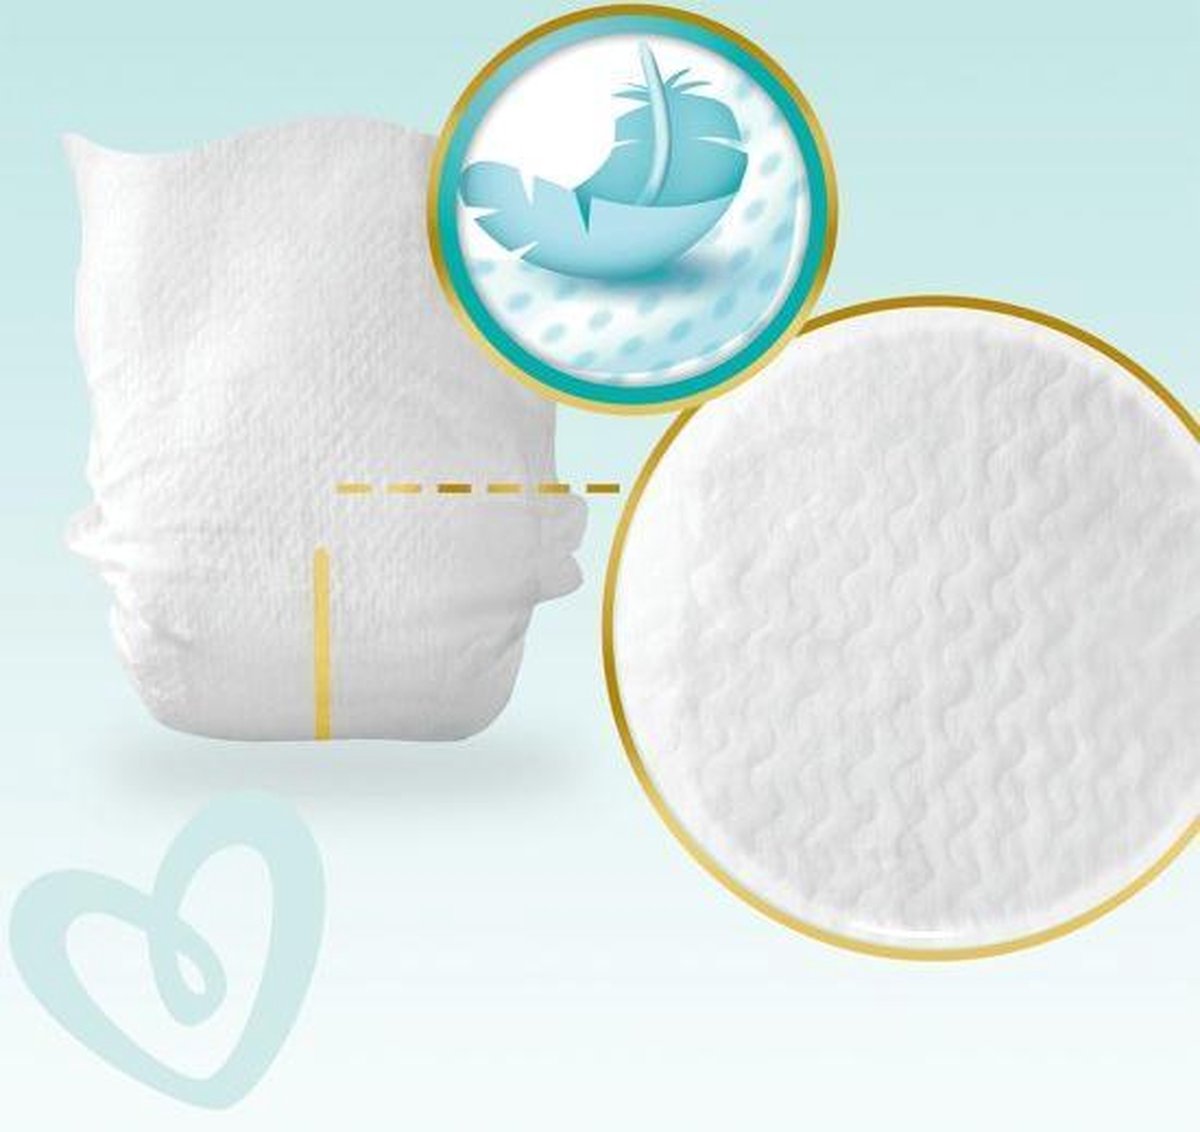 Couches Pampers Premium Protection Couches Taille 3 50